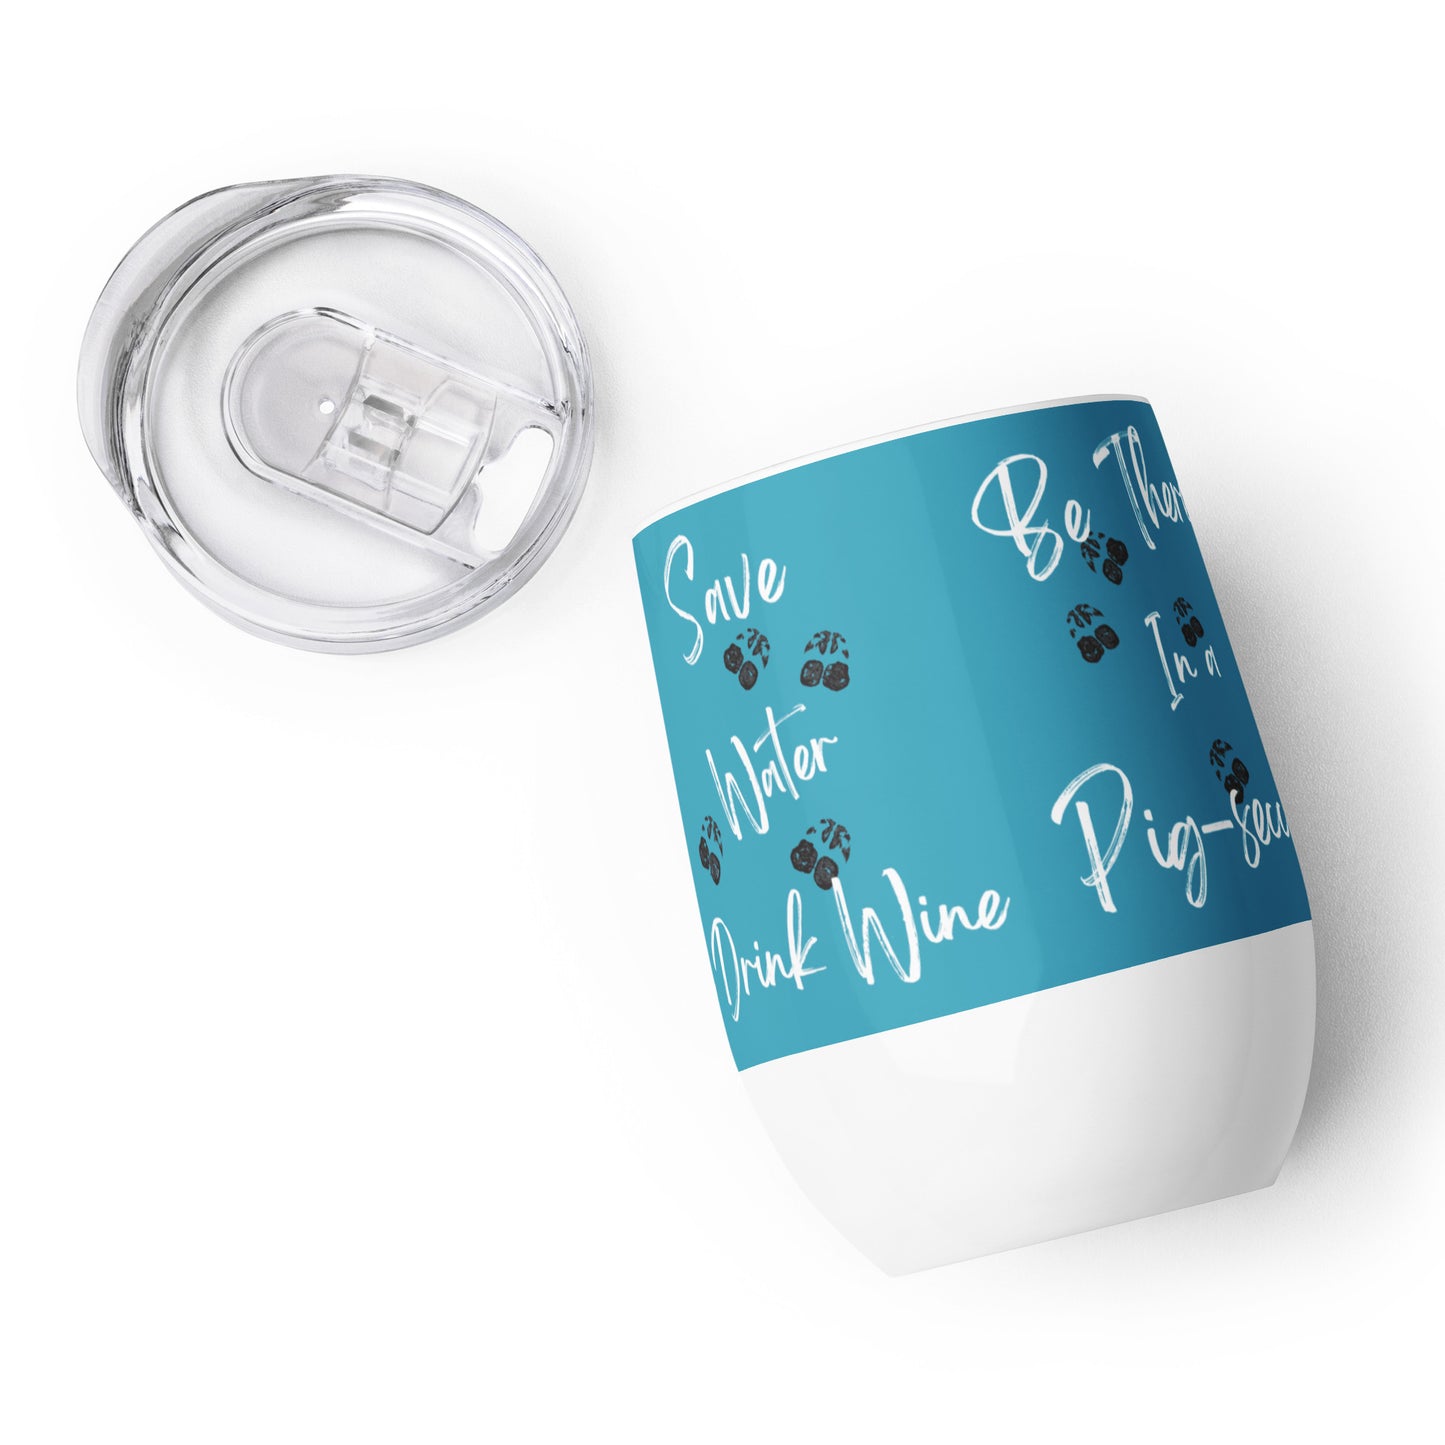 NEW- I'll be there in a Pig-secco! - Adult Grape Juice Holder -Mug- tumbler -Blue